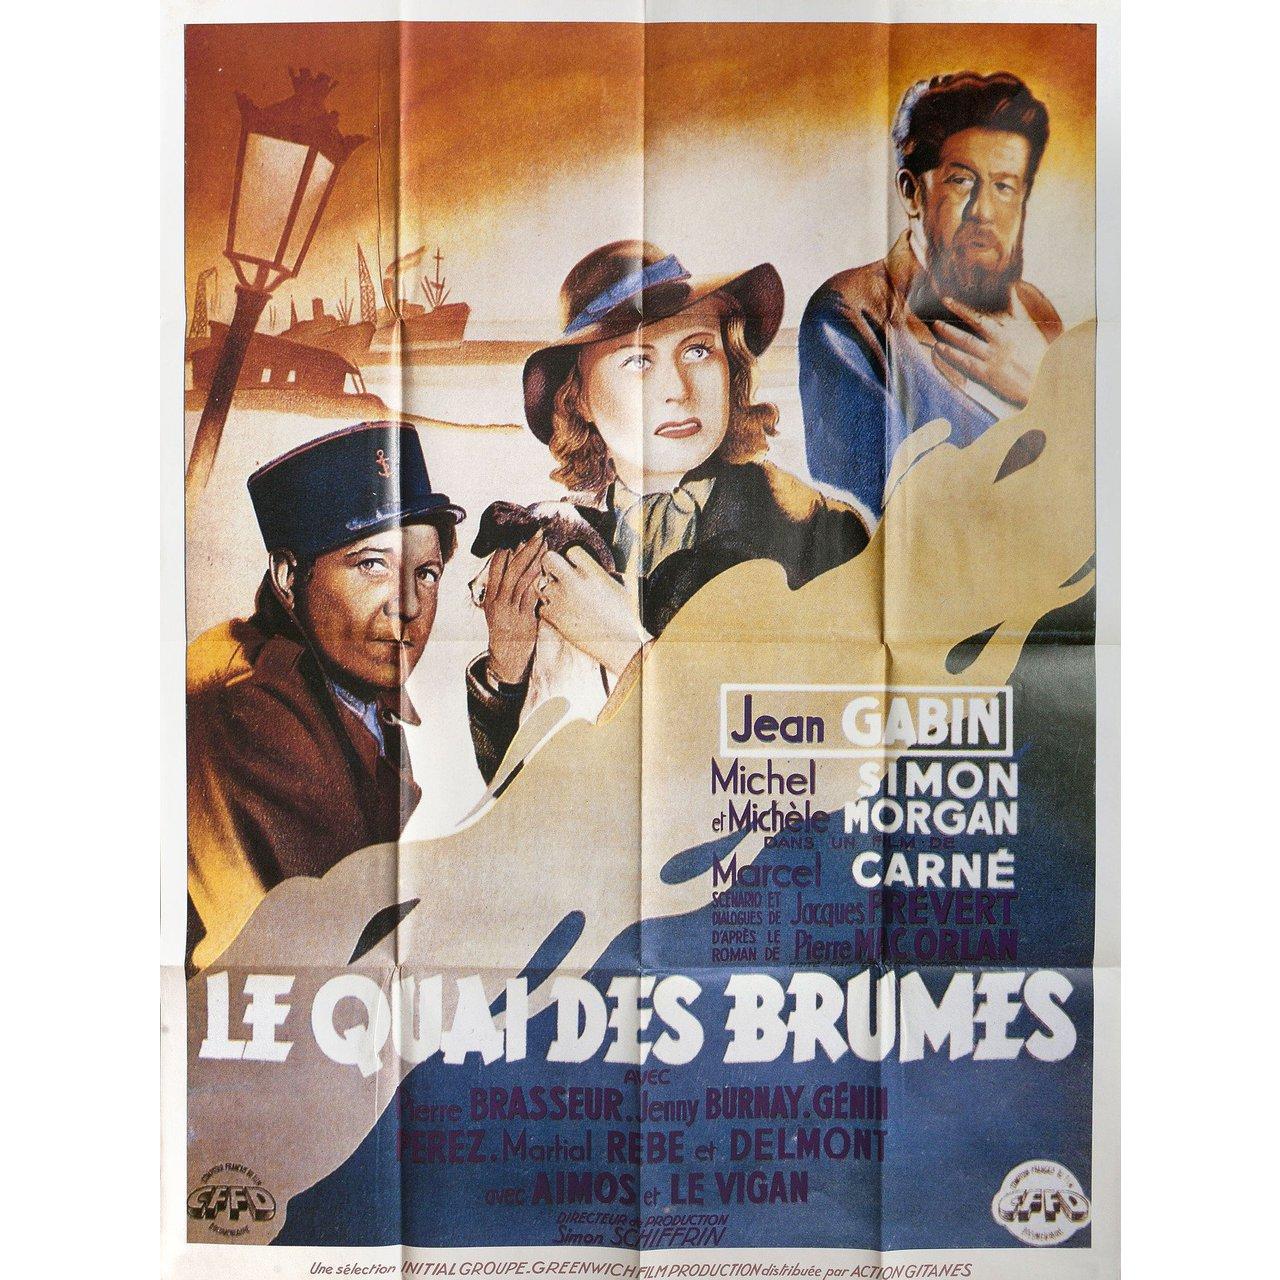 Original 2000s re-release French grande poster for the 1938 film Port of Shadows (Le quai des brumes) directed by Marcel Carne with Jean Gabin / Michel Simon / Michele Morgan / Pierre Brasseur. Fine condition, folded. Many original posters were